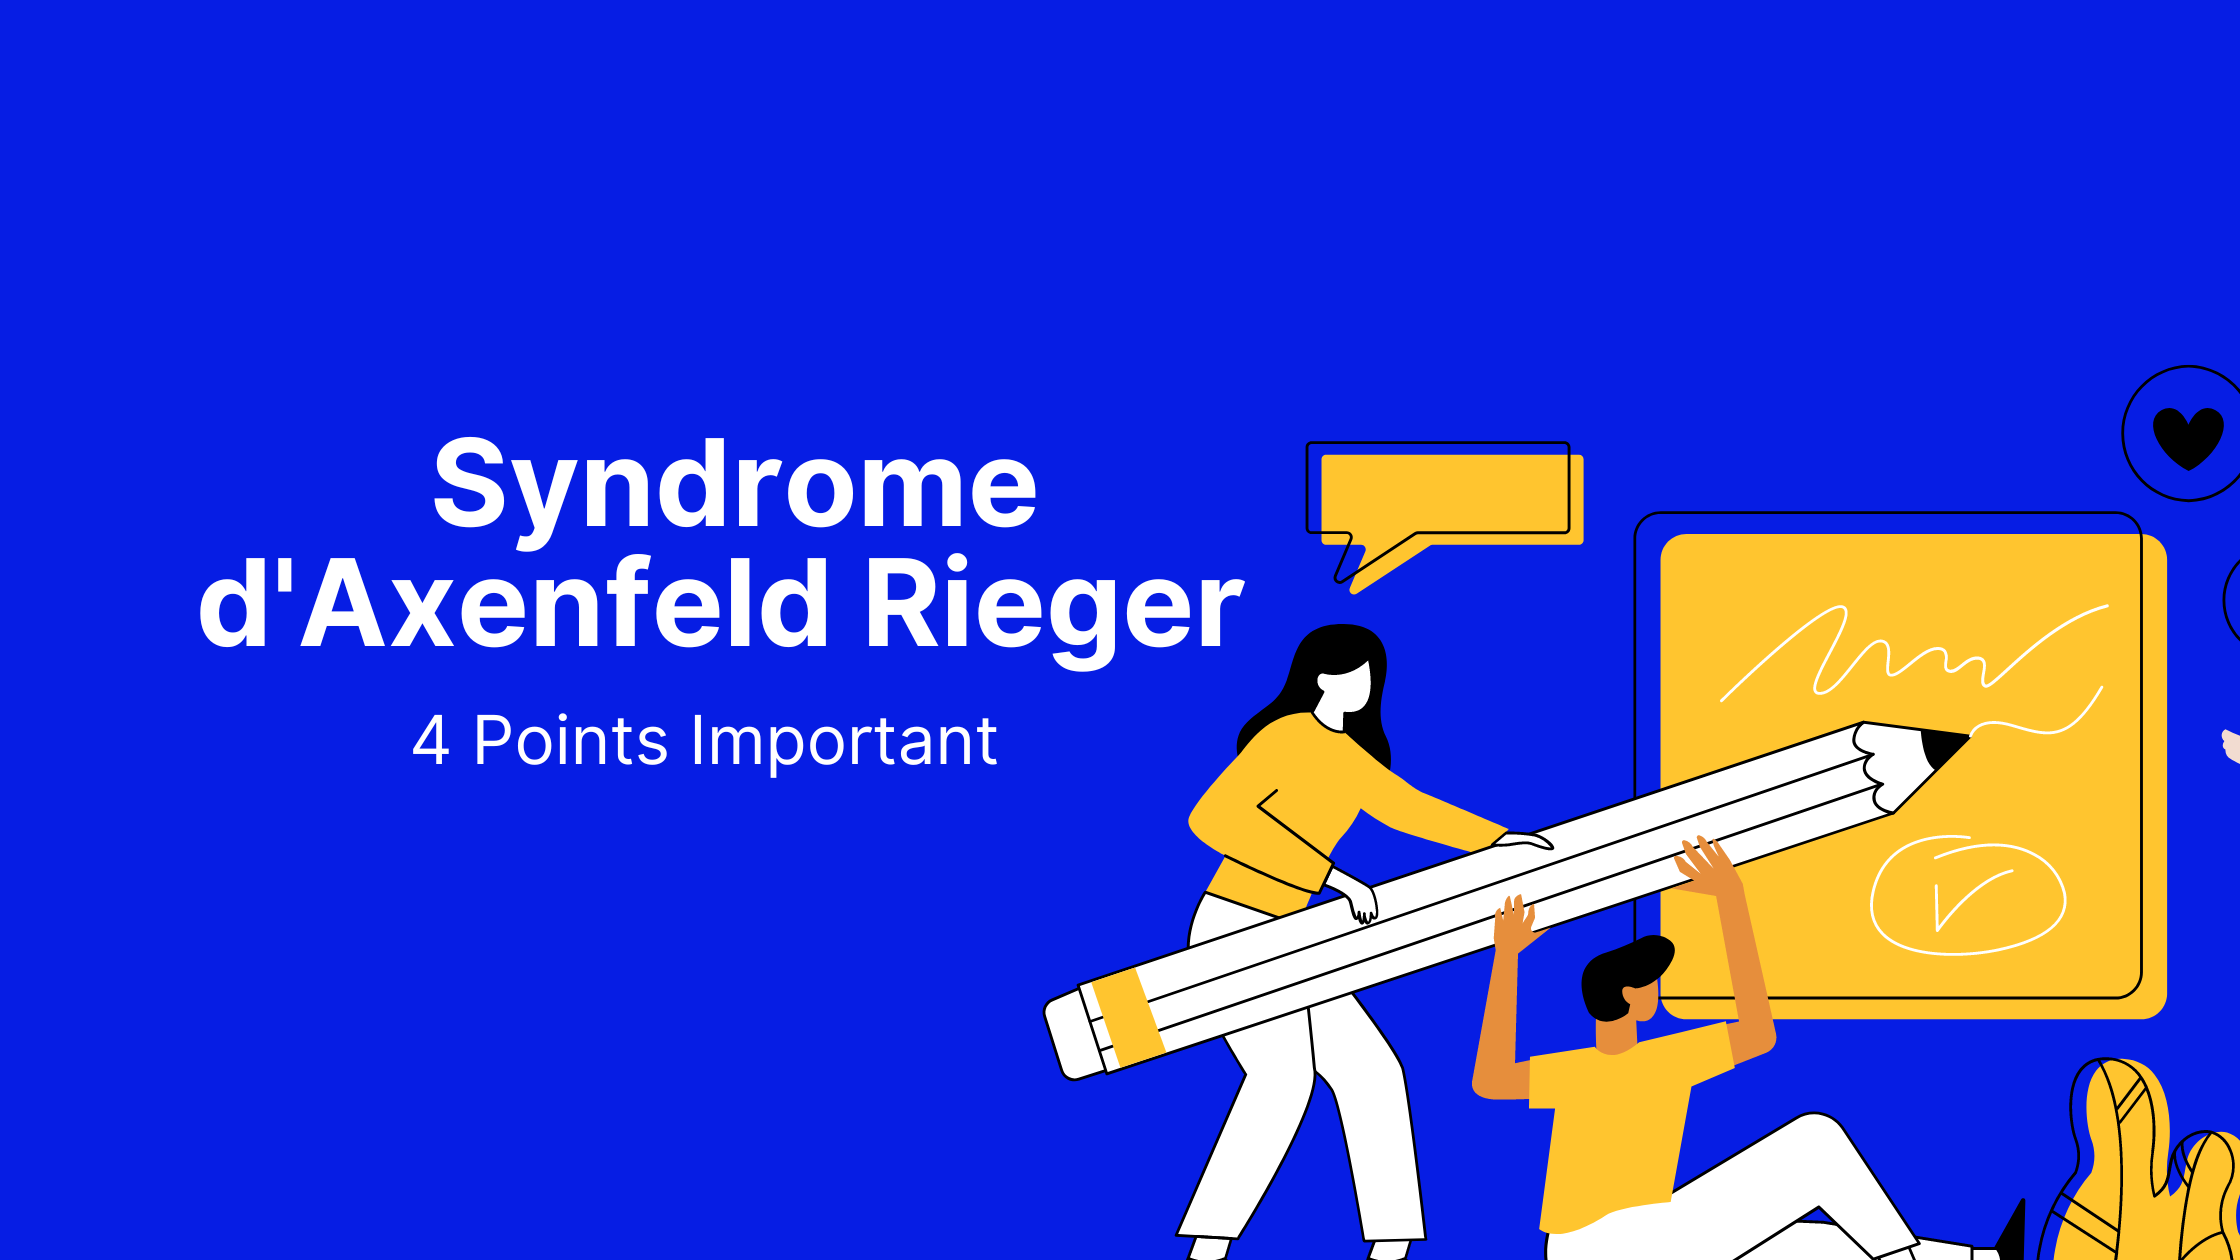 Syndrome d'Axenfeld Rieger | 4 Points Important